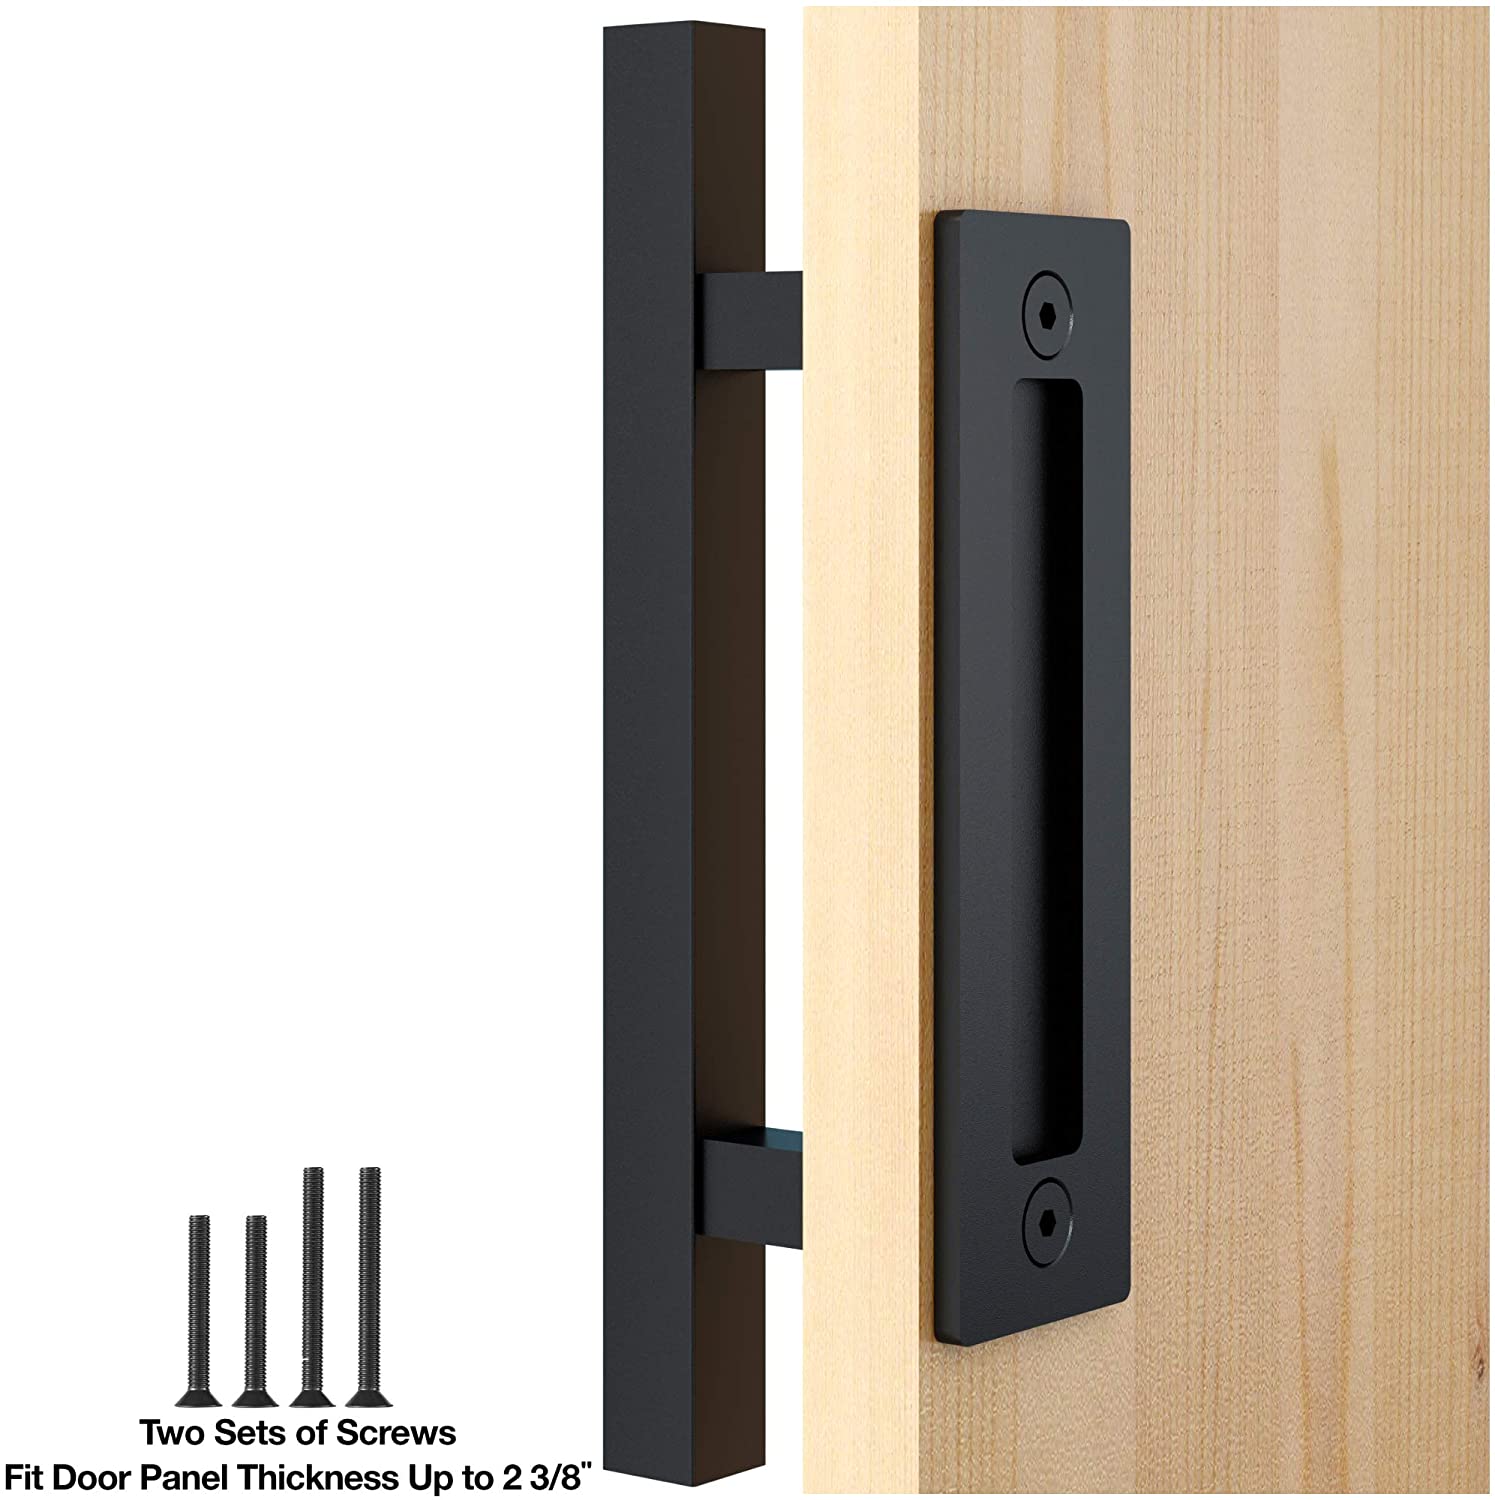 FaithLand 12" Barn Door Handle with Flush Finger Pull, Pull and Flush Door Handle Set in Black, Square - Fit Doors Up to 2 3/8'' 12" Black Pull Handle (Square) - image 2 of 7